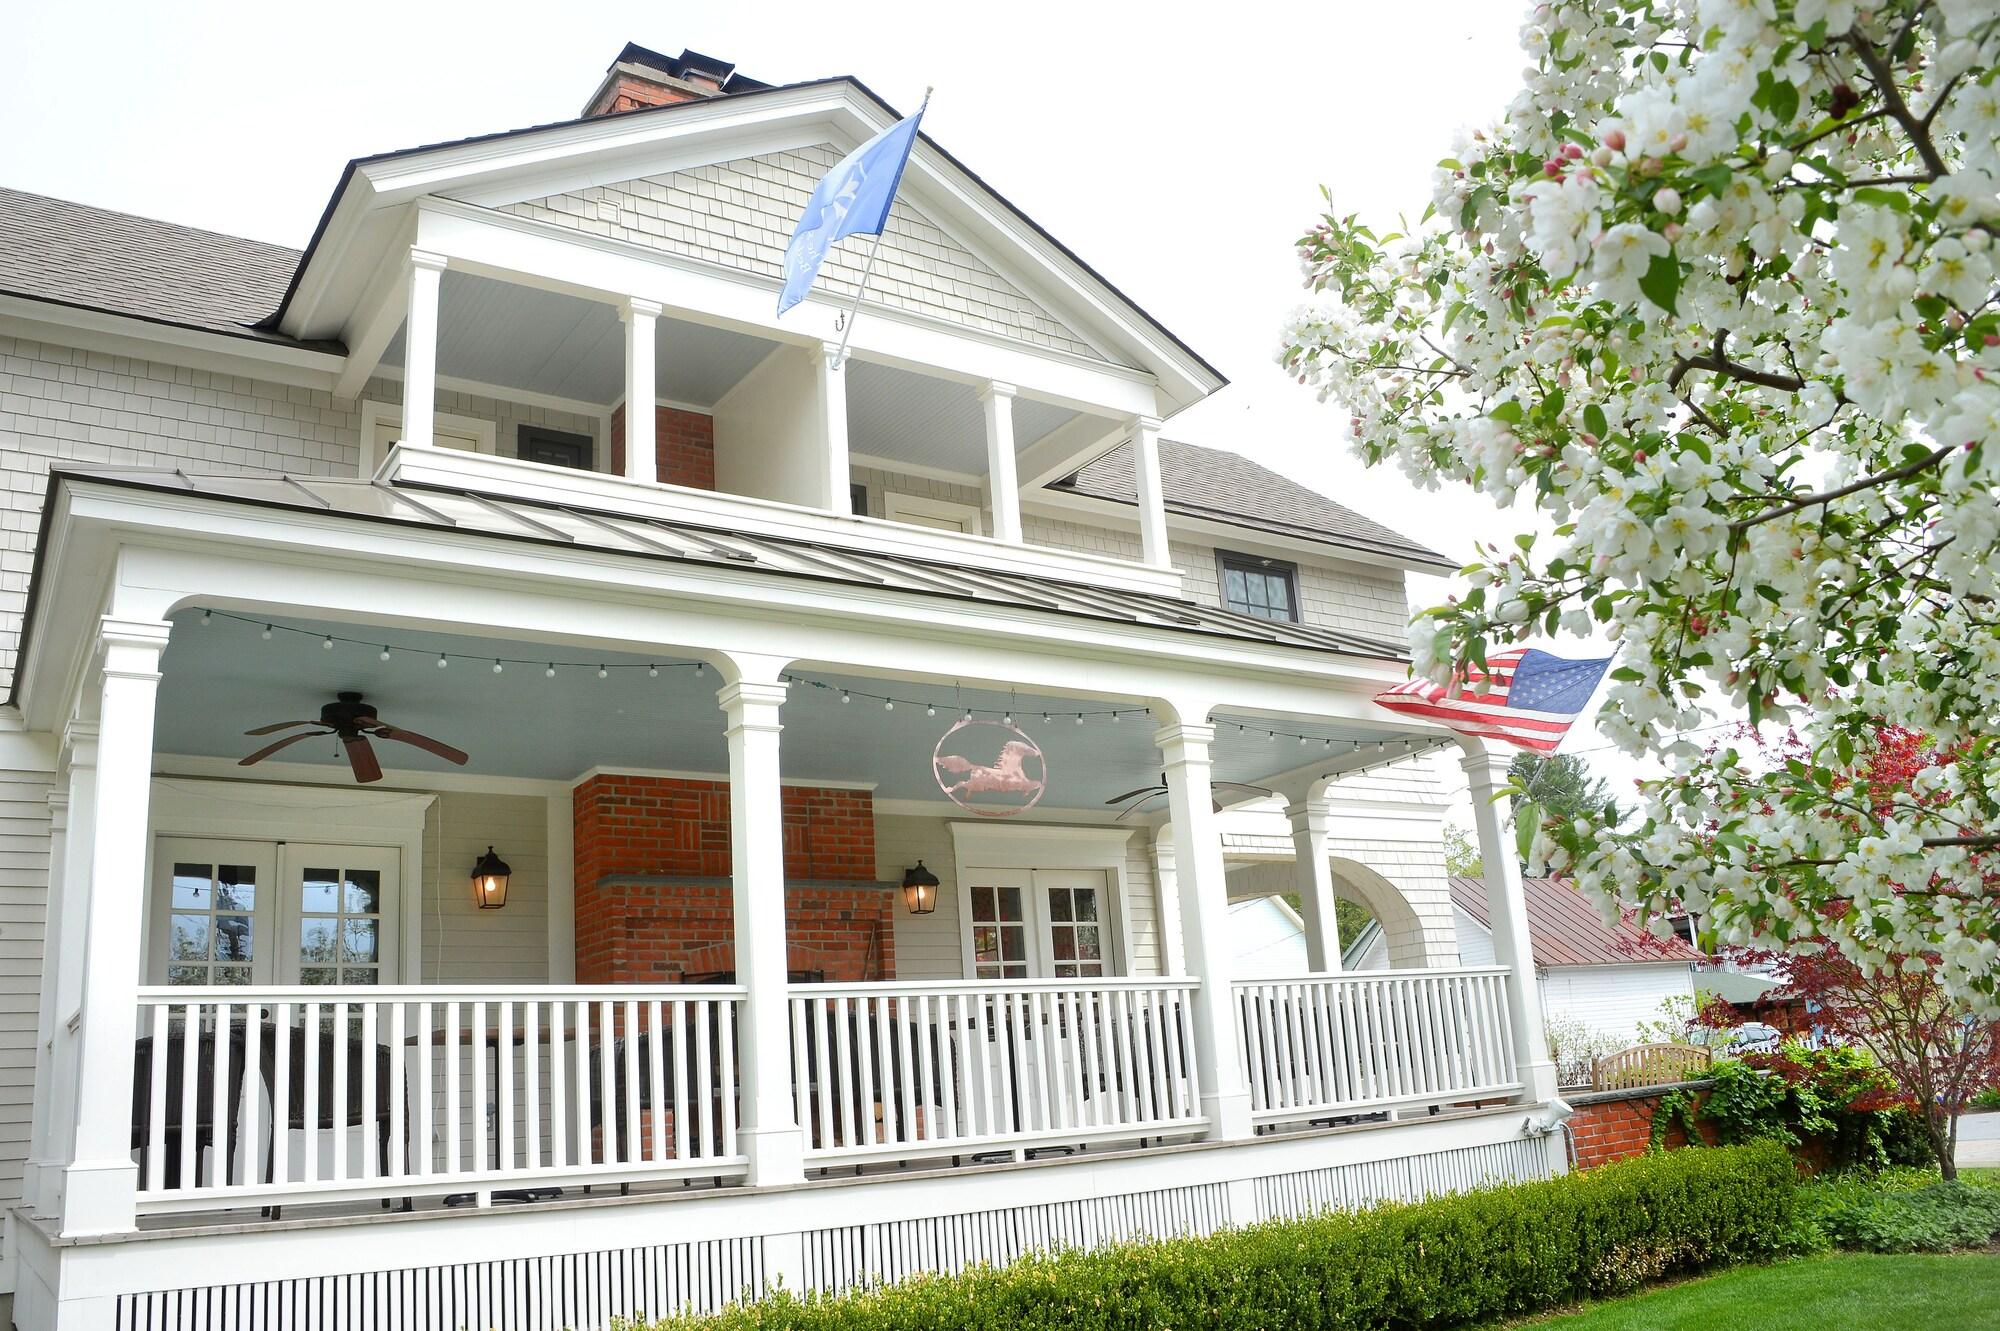 The Springwater Bed and Breakfast image